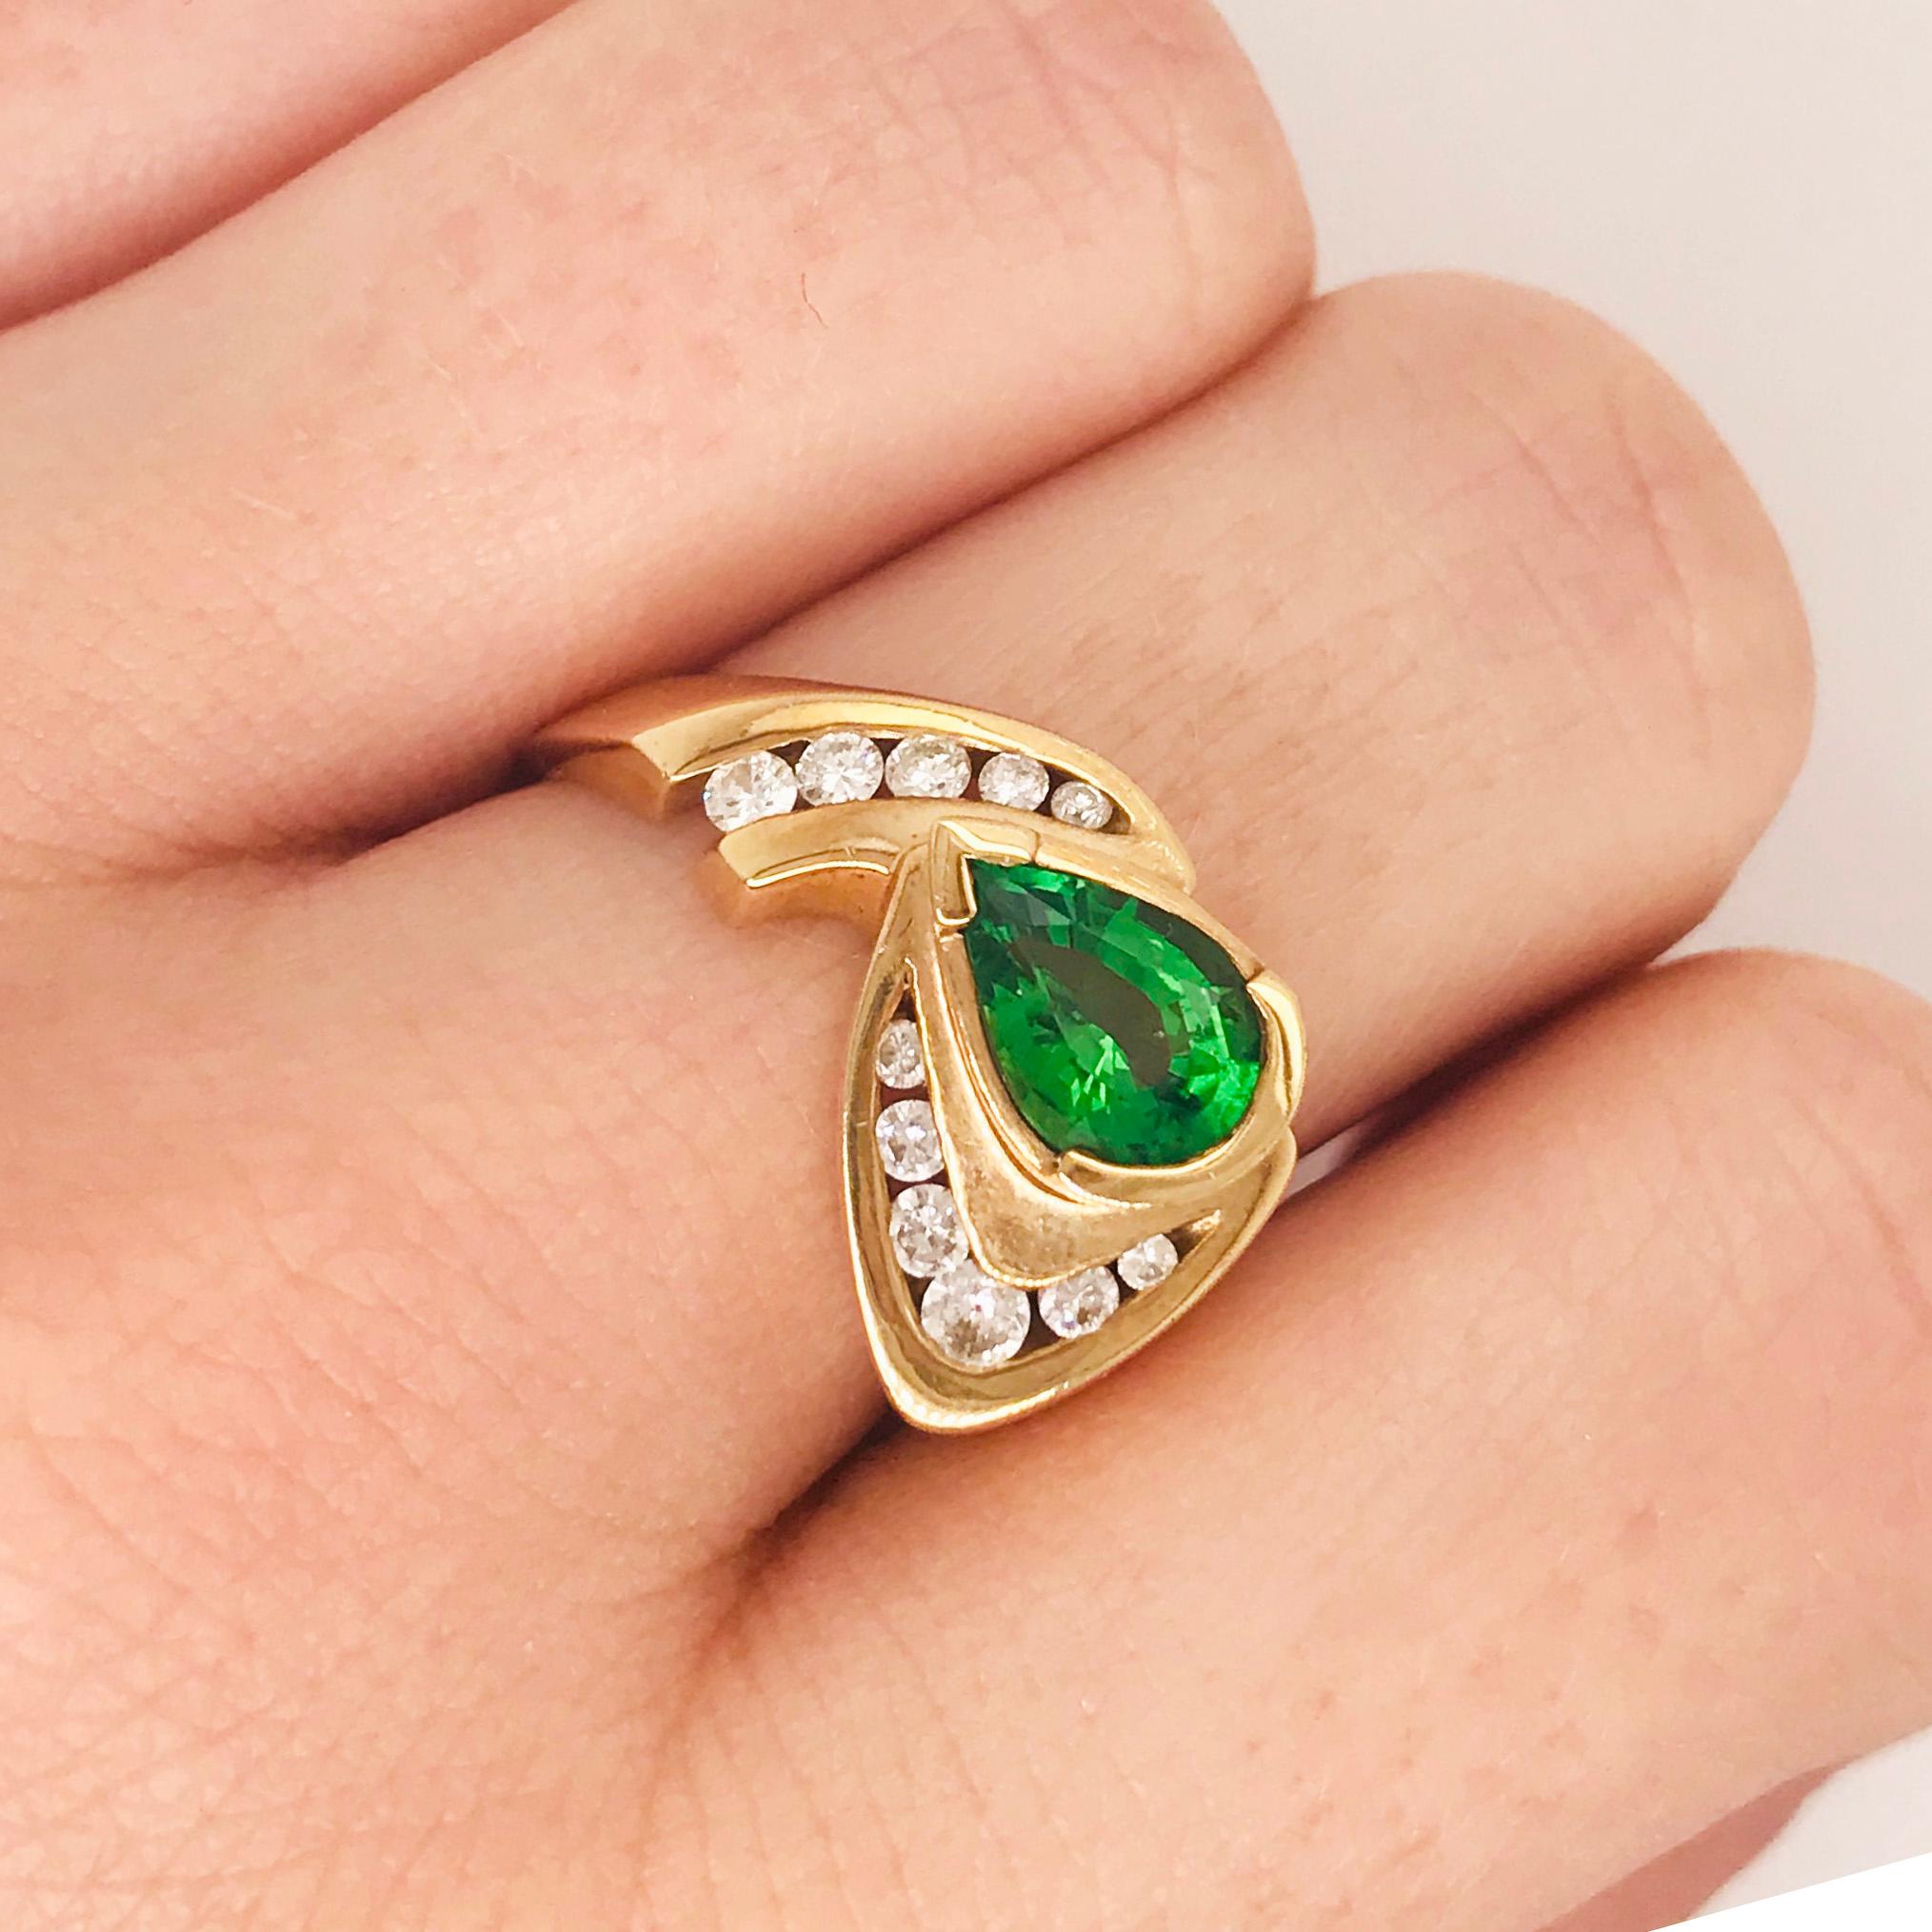 The vibrant custom chrome tourmaline and diamond ring is bold and beautiful! With a pear shaped genuine green/chrome tourmaline gemstone set in center. The chrome tourmaline has a very bright green color that is the most valuable of all tourmaline